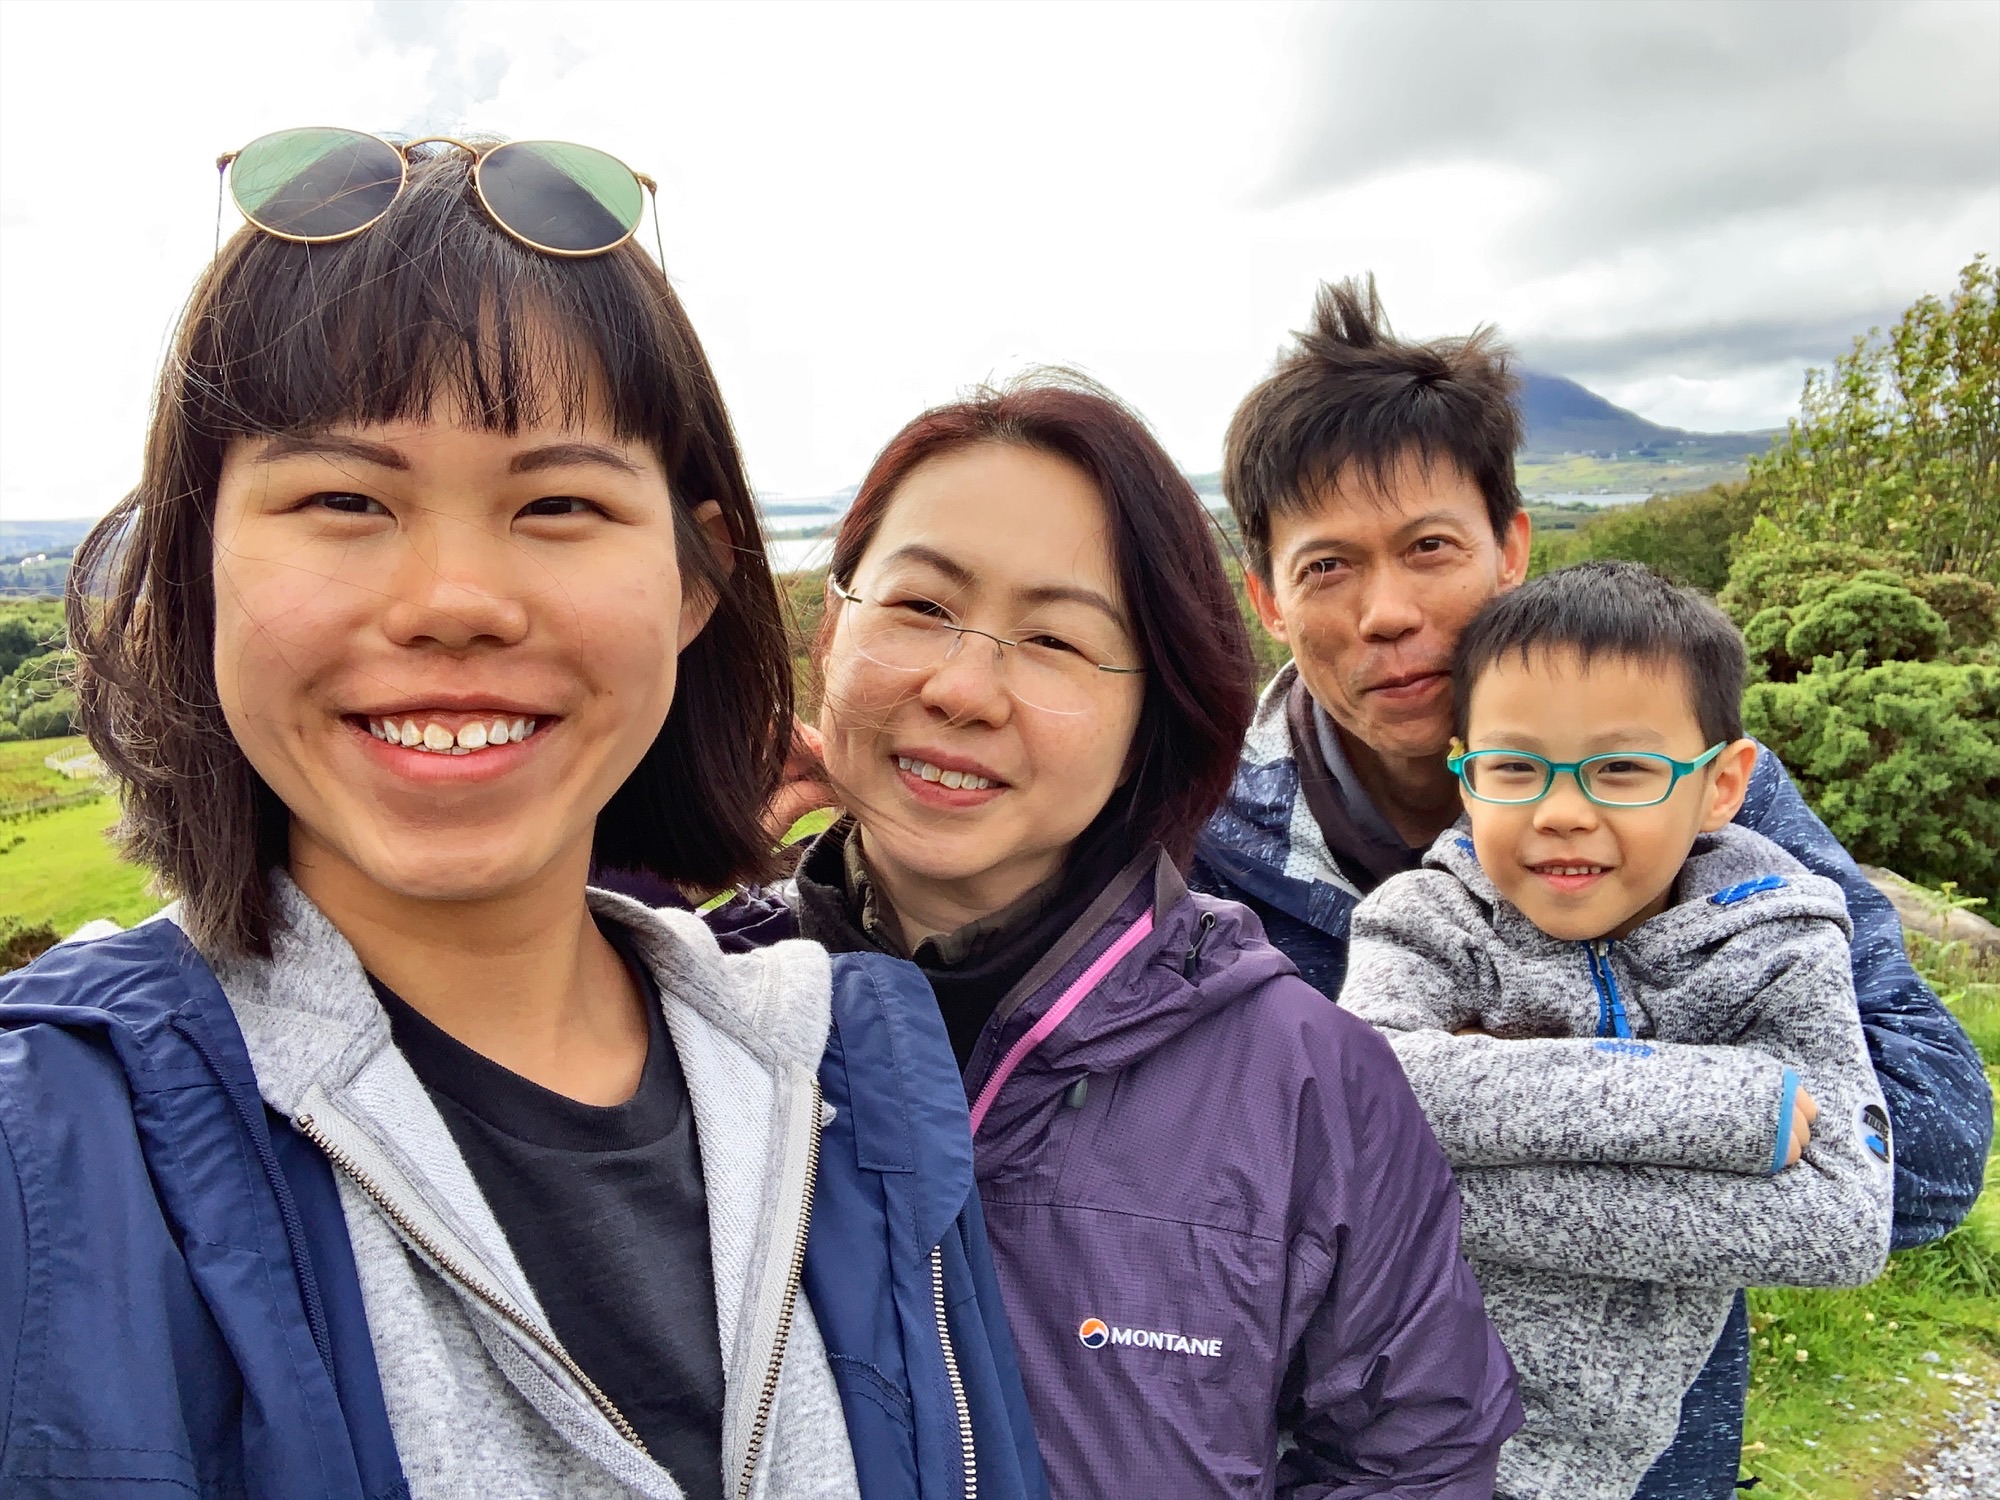 A family photo of Lok Shee Mei with her husband and two children on holiday